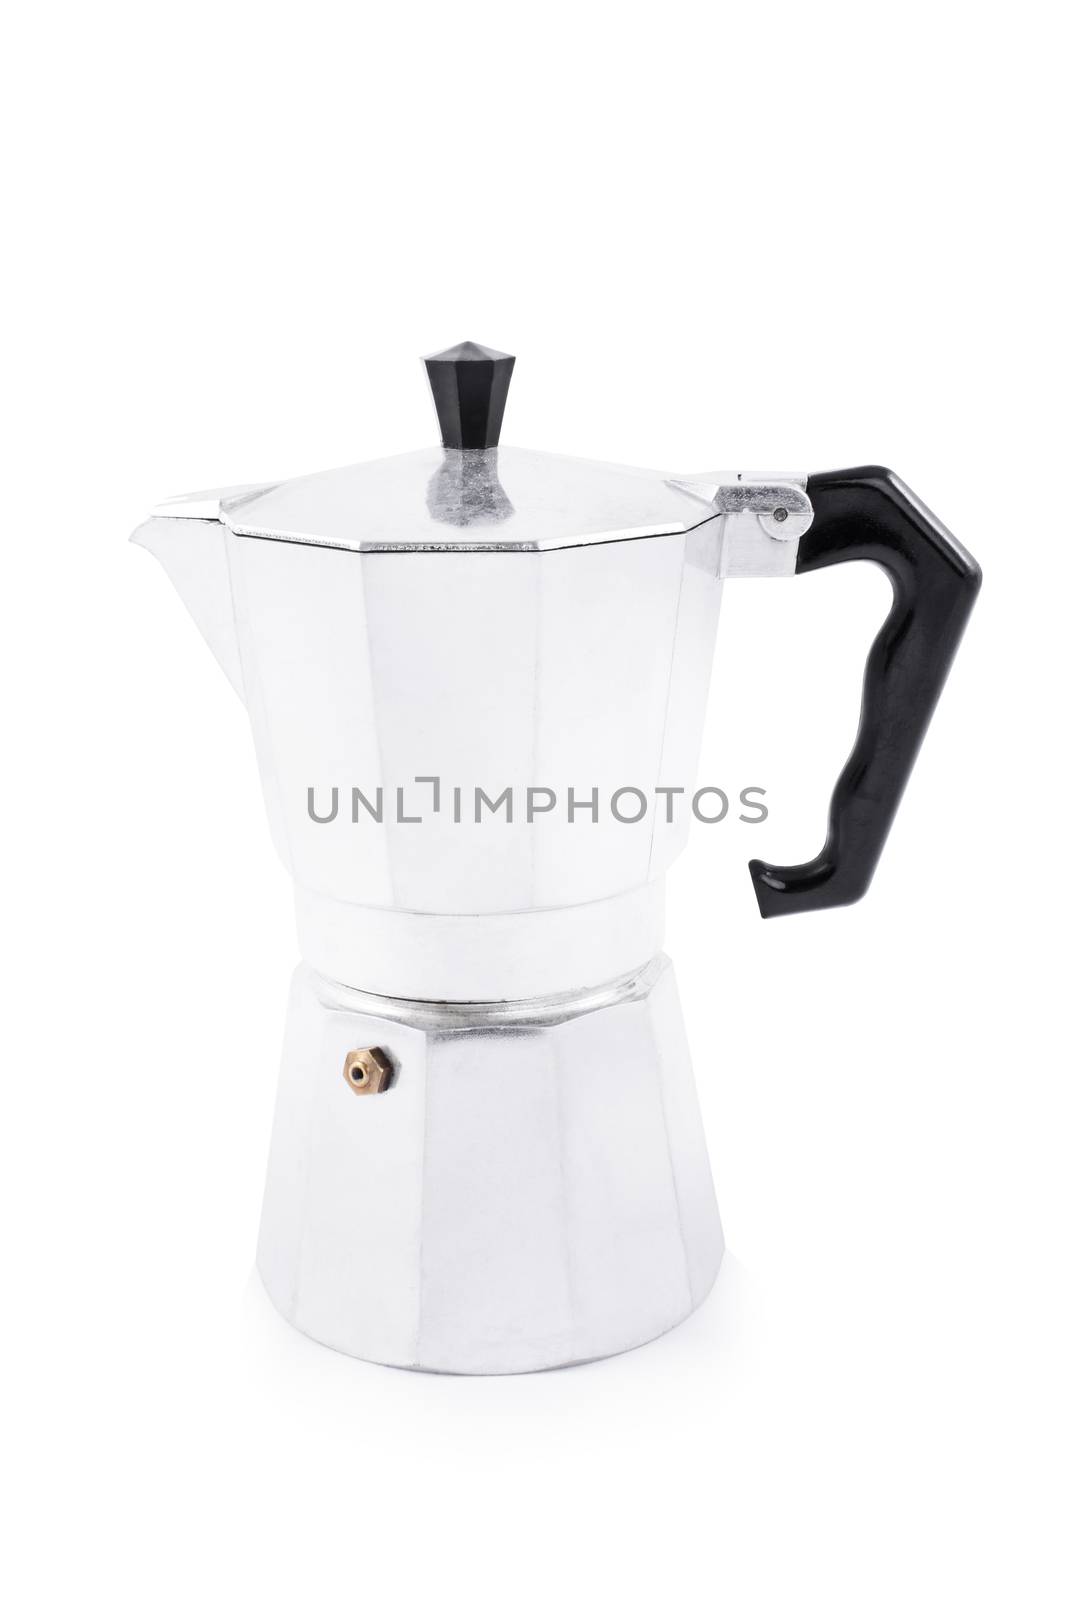 Side view of a metallic moka maker, isolated on white background.